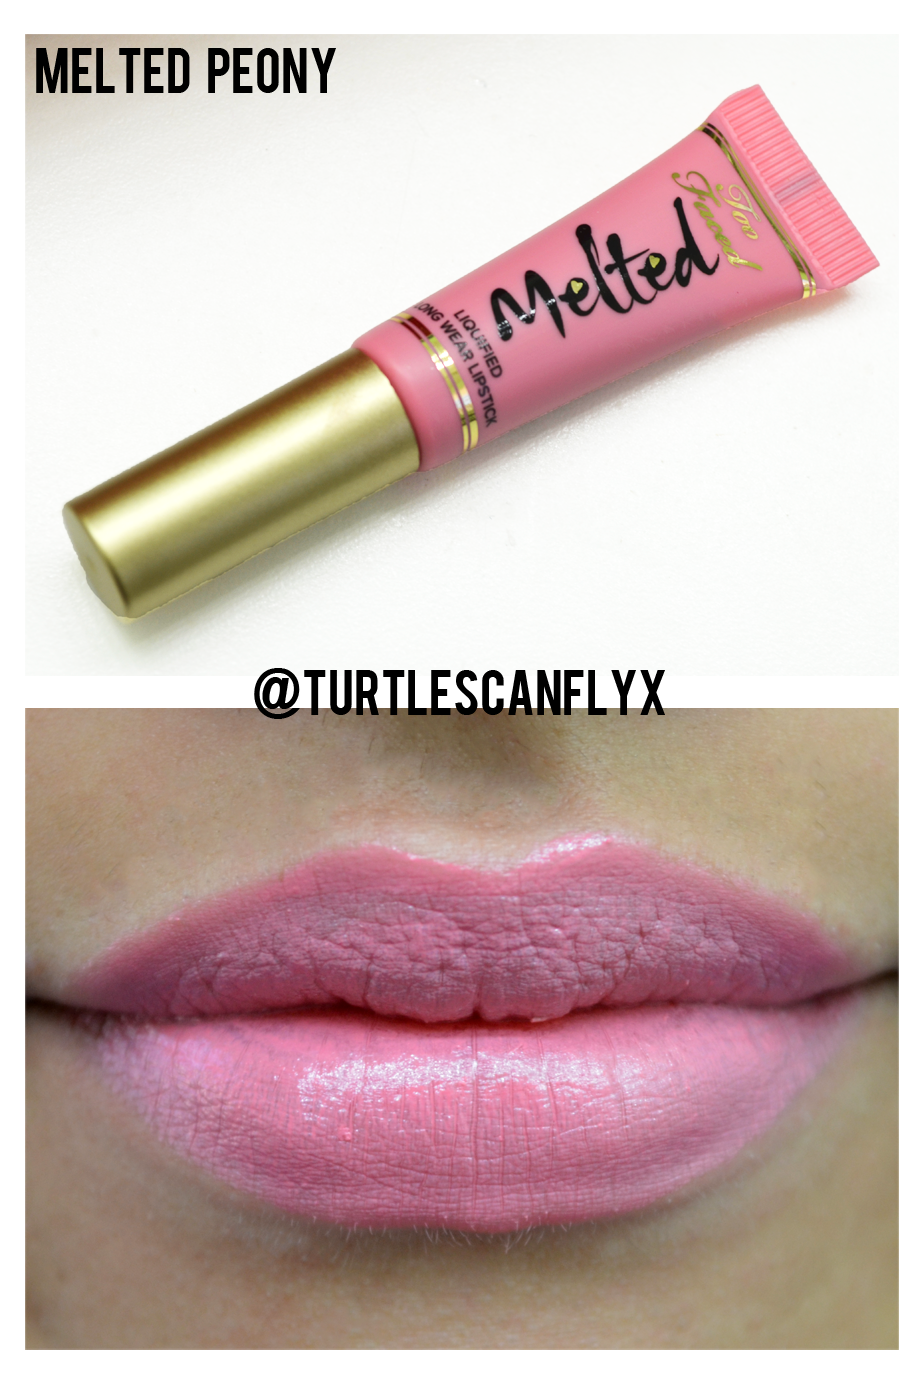 Melted Peony Too Faced Swatch